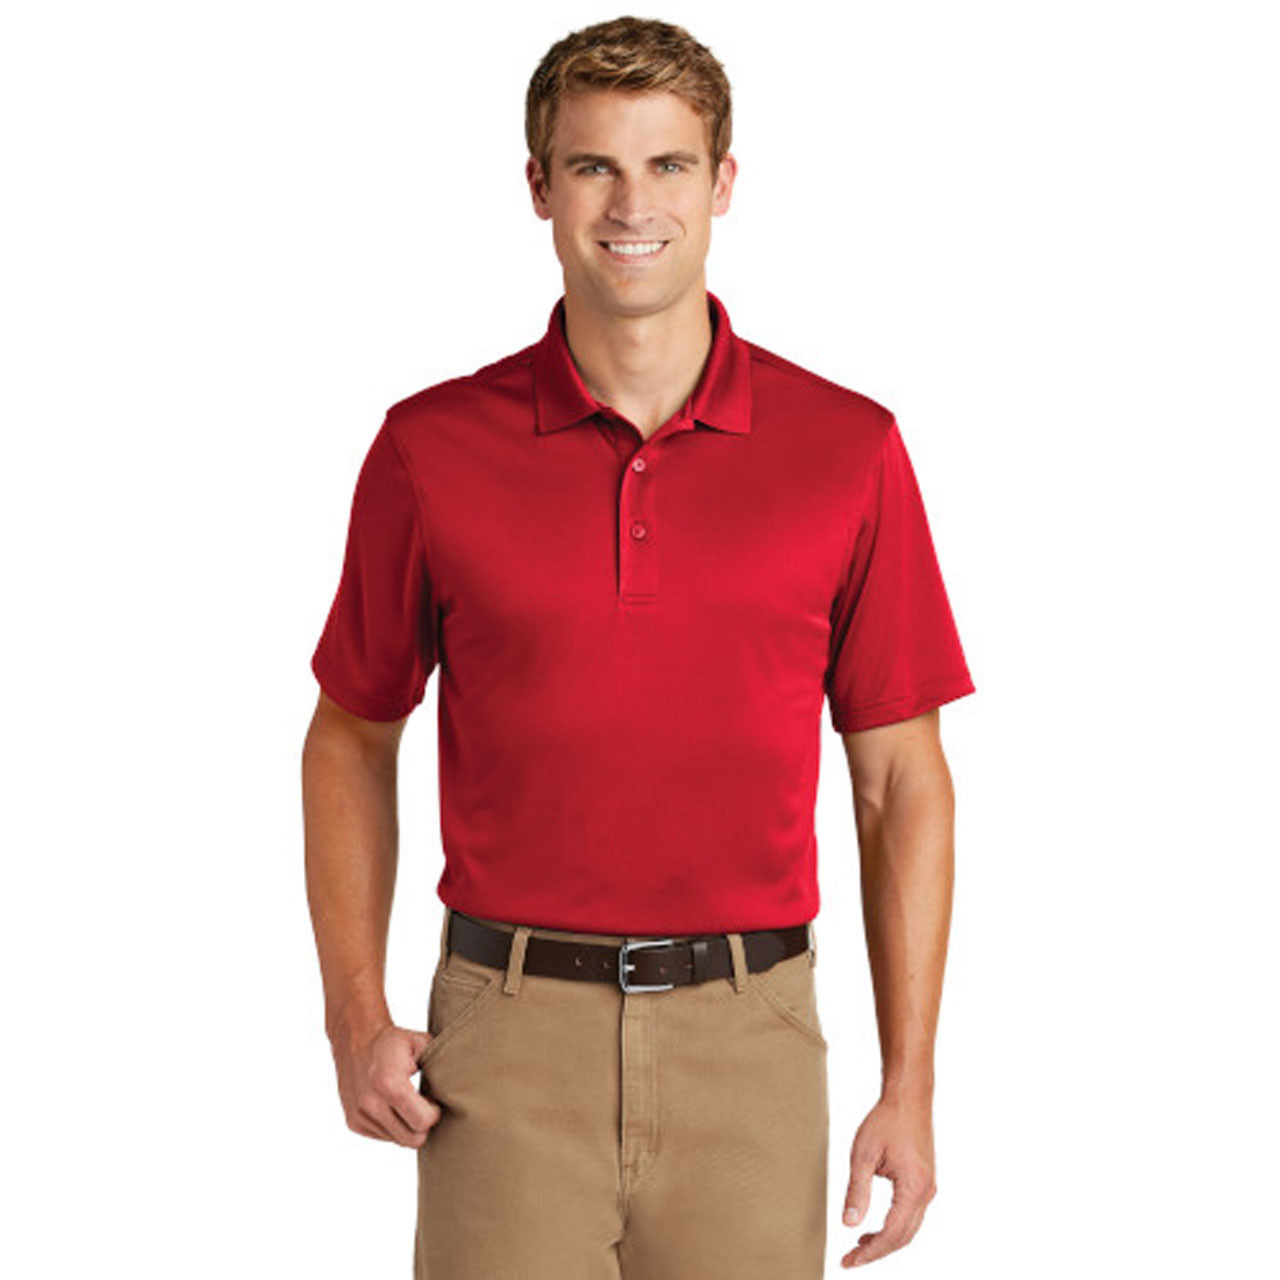 Is it one red polo and khaki pants per bulk case?